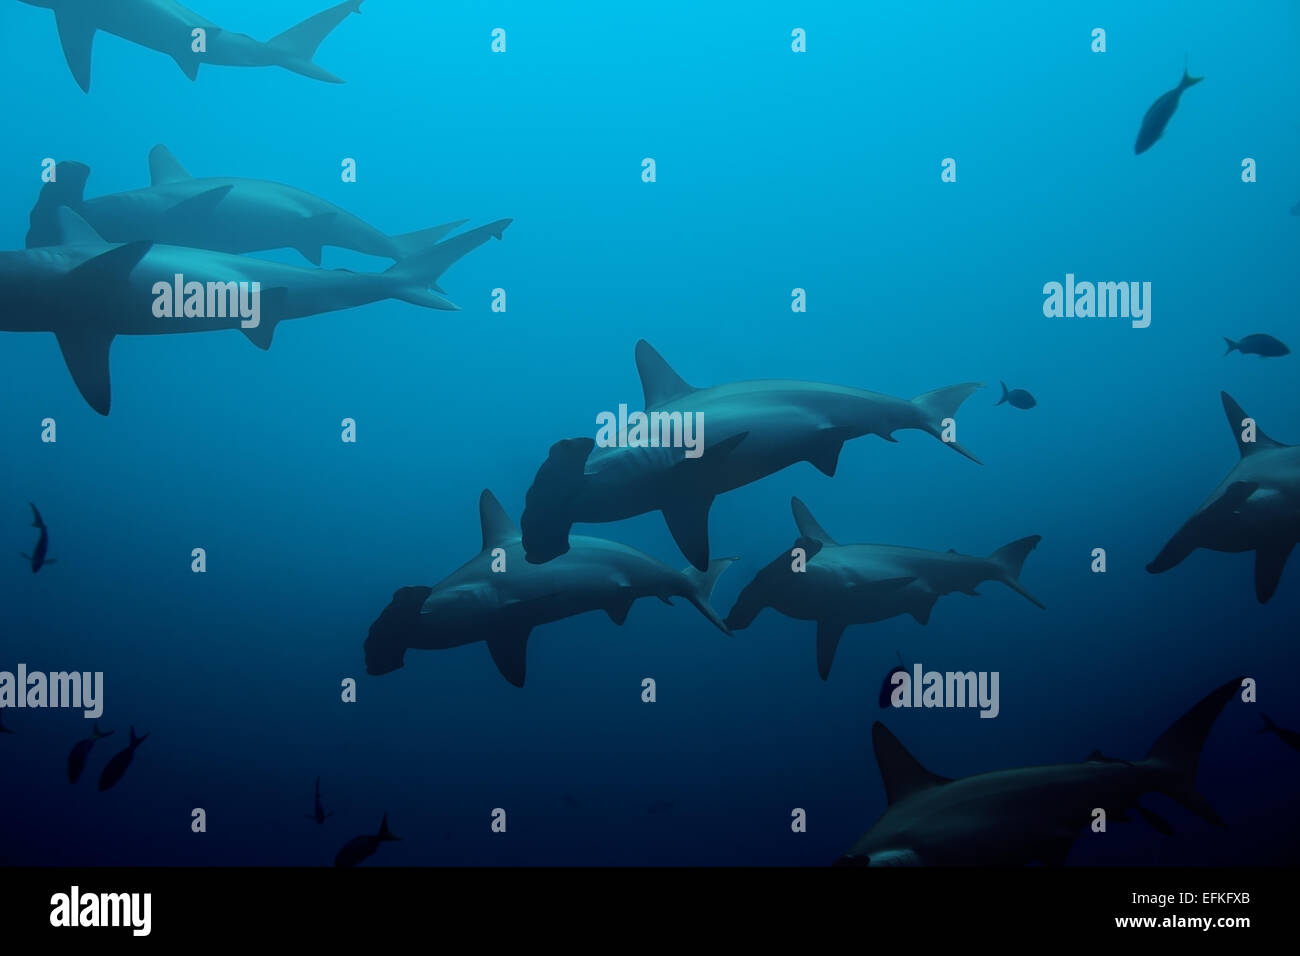 Large school of hammerhead sharks in the blue Stock Photo